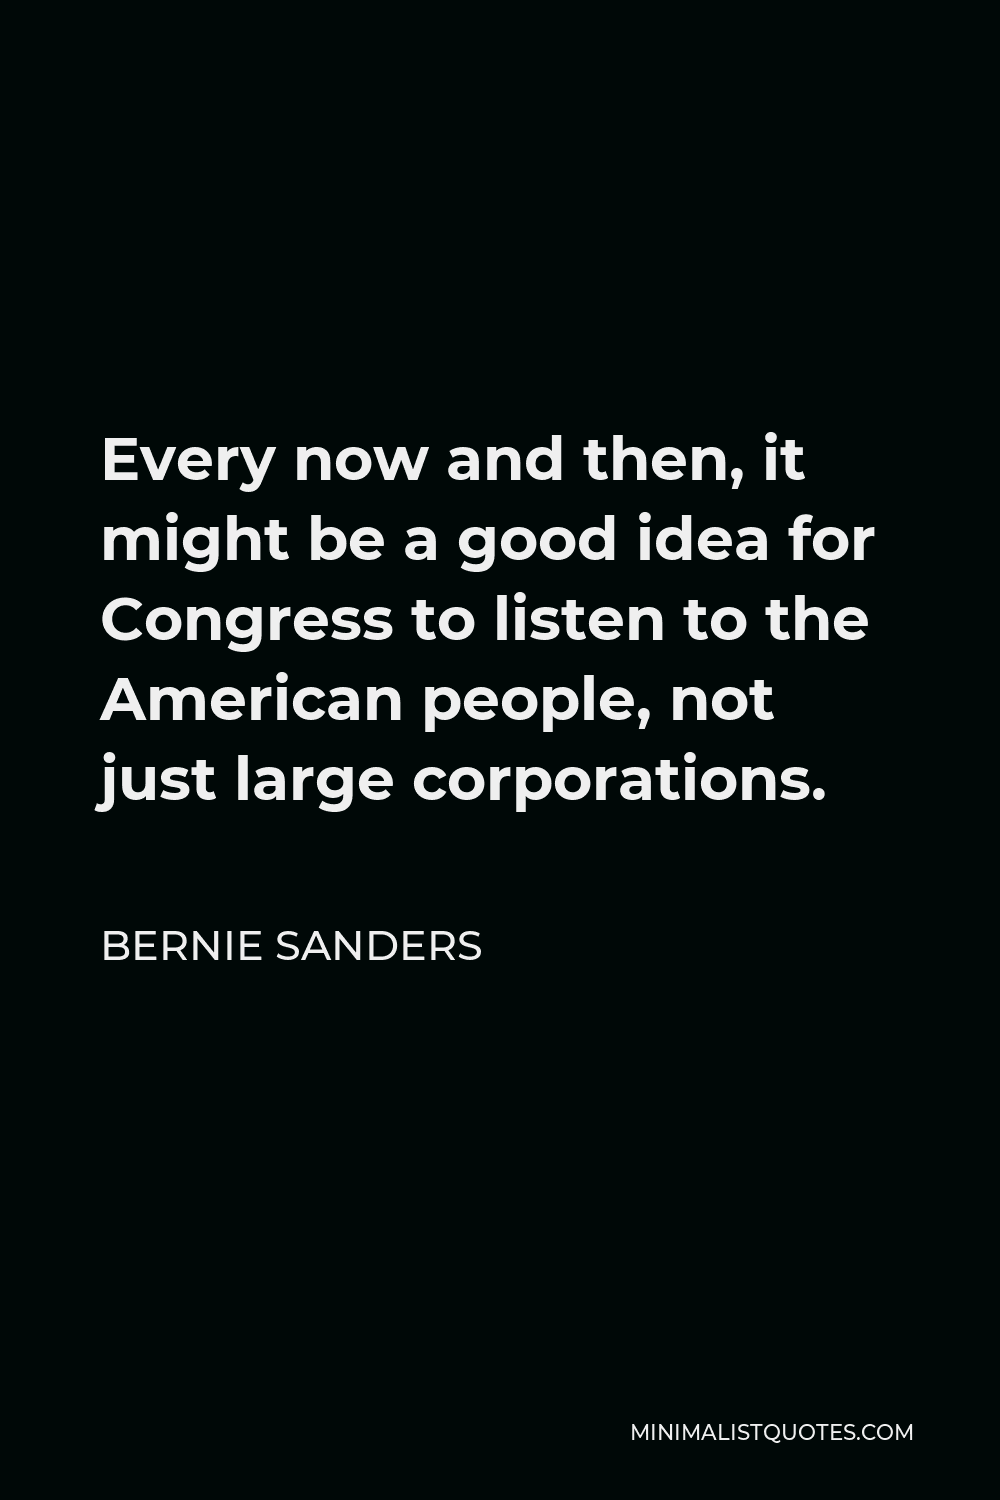 Bernie Sanders Quote - Every now and then, it might be a good idea for Congress to listen to the American people, not just large corporations.